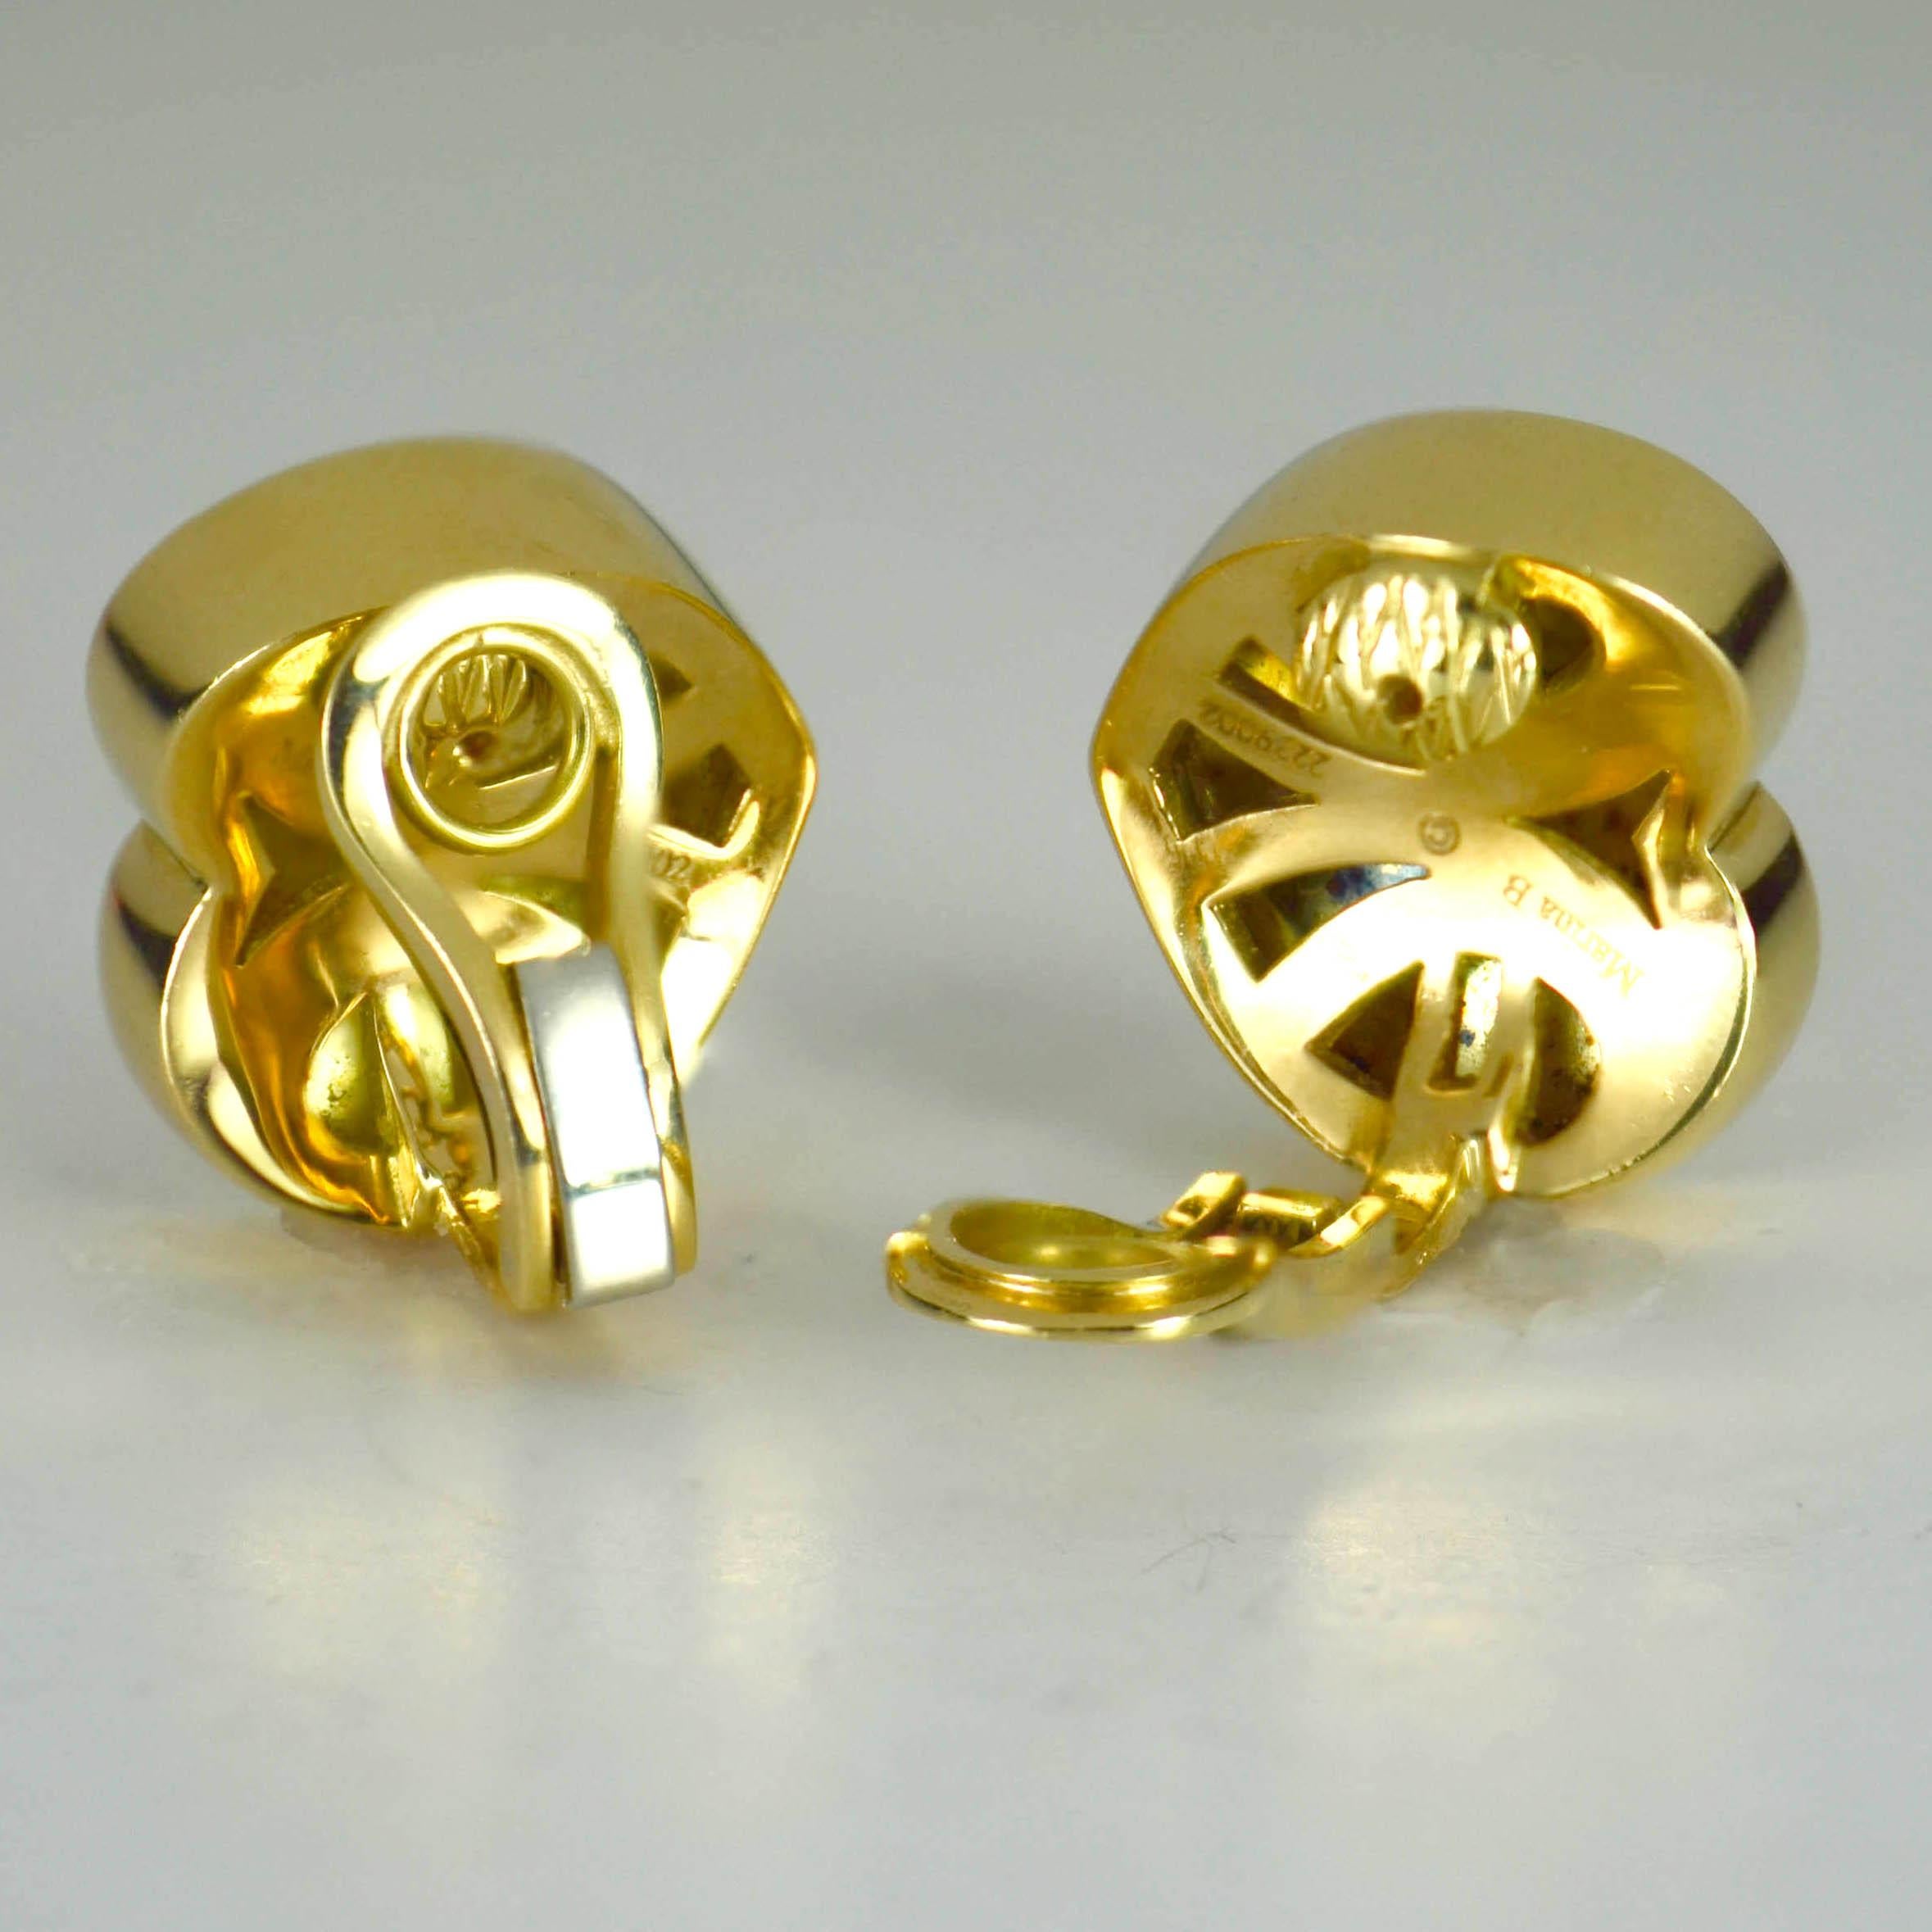 Marina B Yellow Gold Heart Ear Clip Earrings In Good Condition For Sale In London, GB